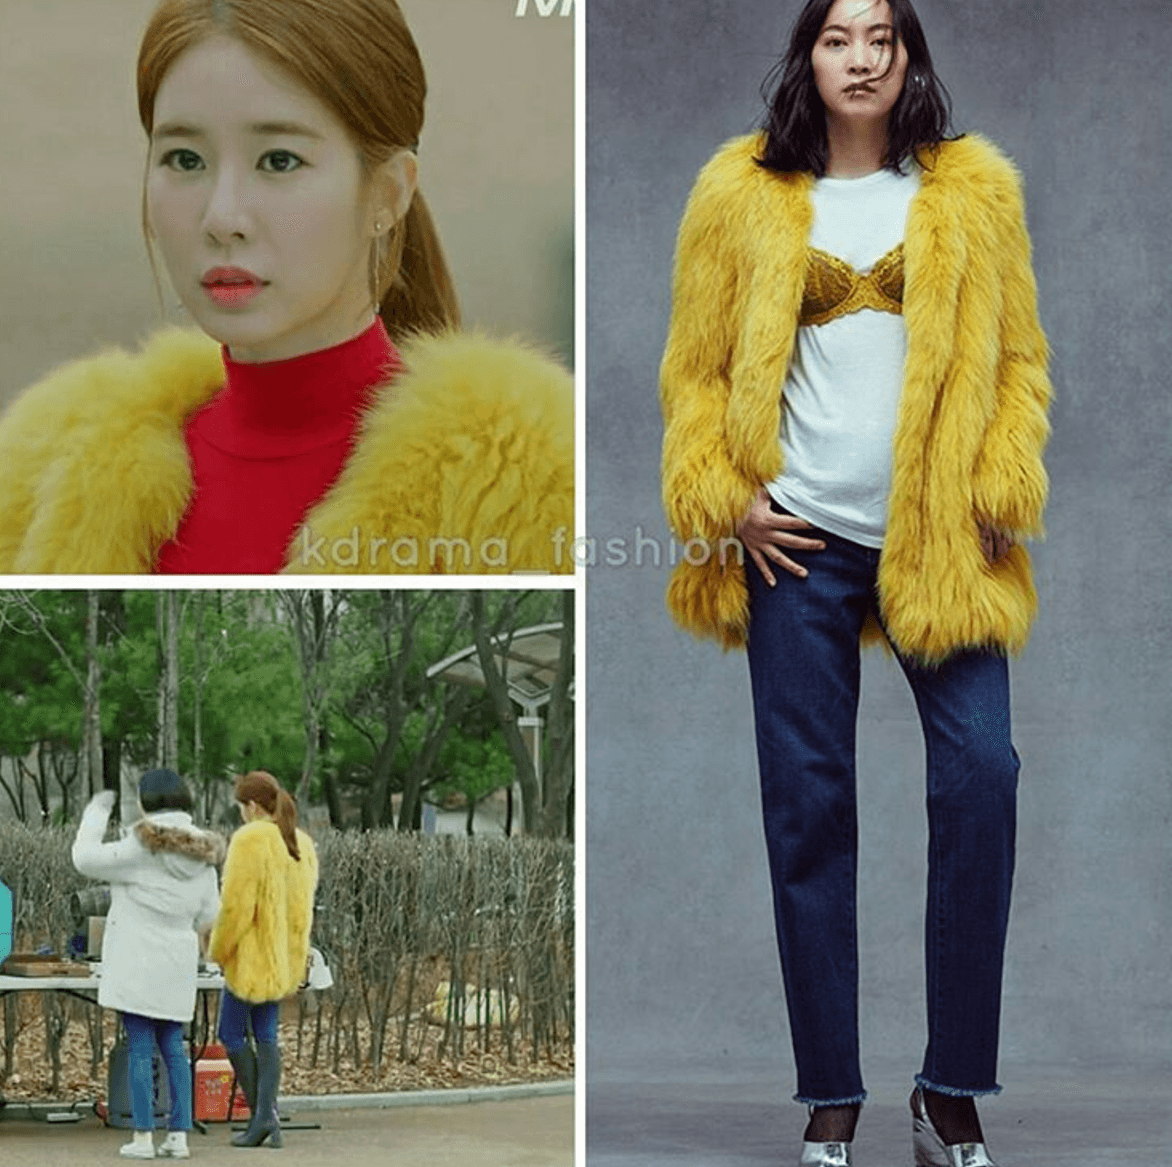 This Is How Much It Costs To Dress Like Sunny From Goblin - Koreaboo